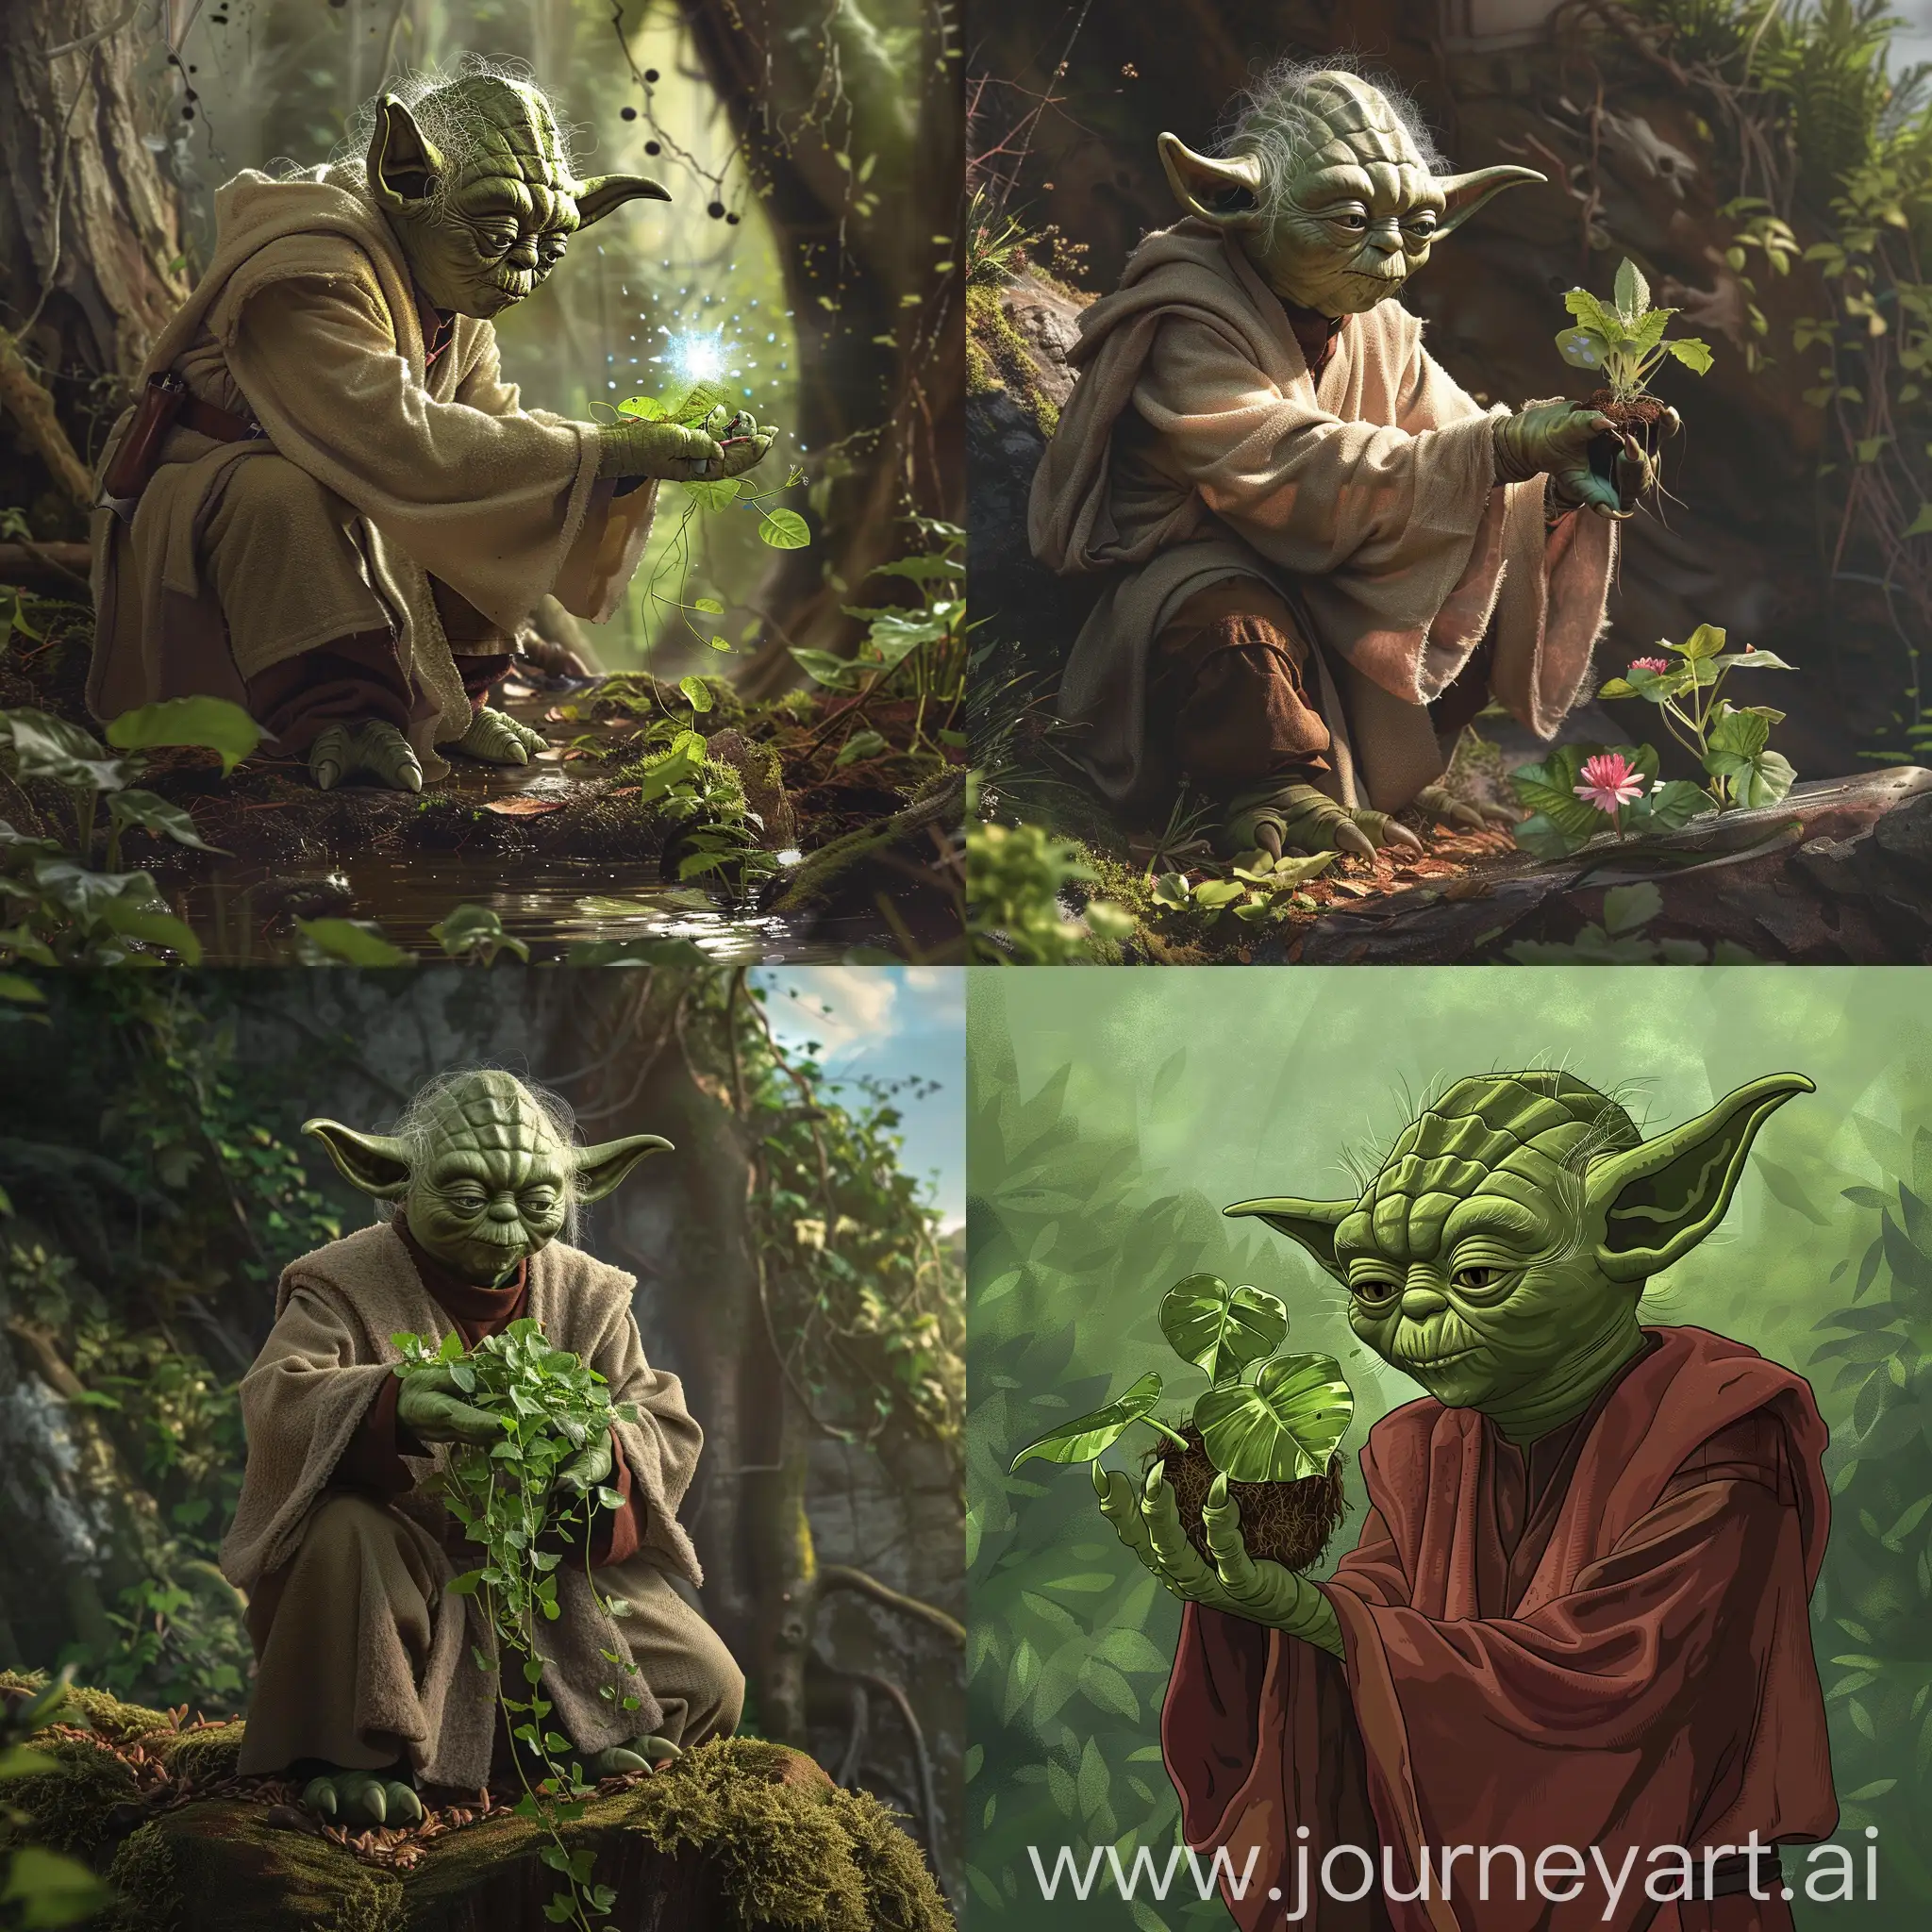 Yoda-Saving-Nature-Legendary-Jedi-Protects-the-Forest